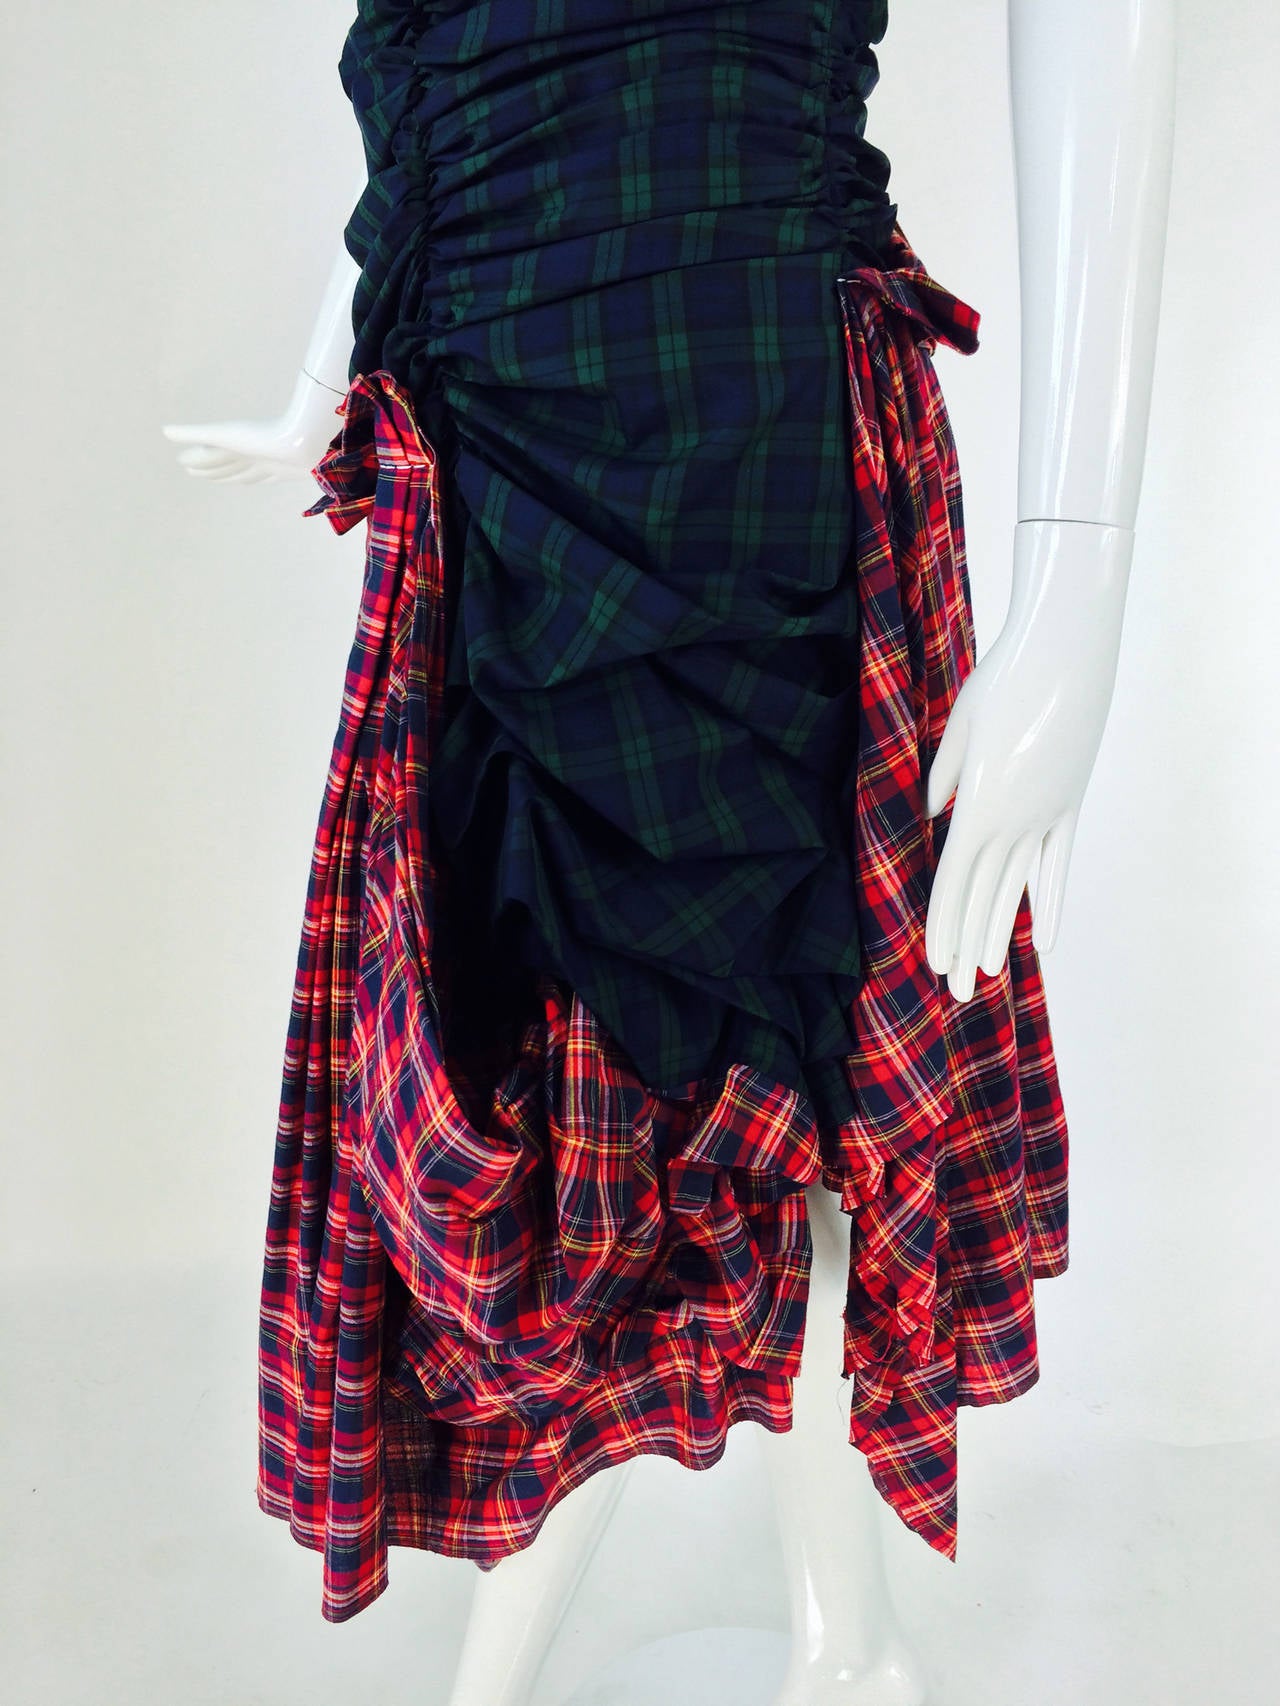 Comme des Garcons tartan/plaid dress in green & red 2005 2